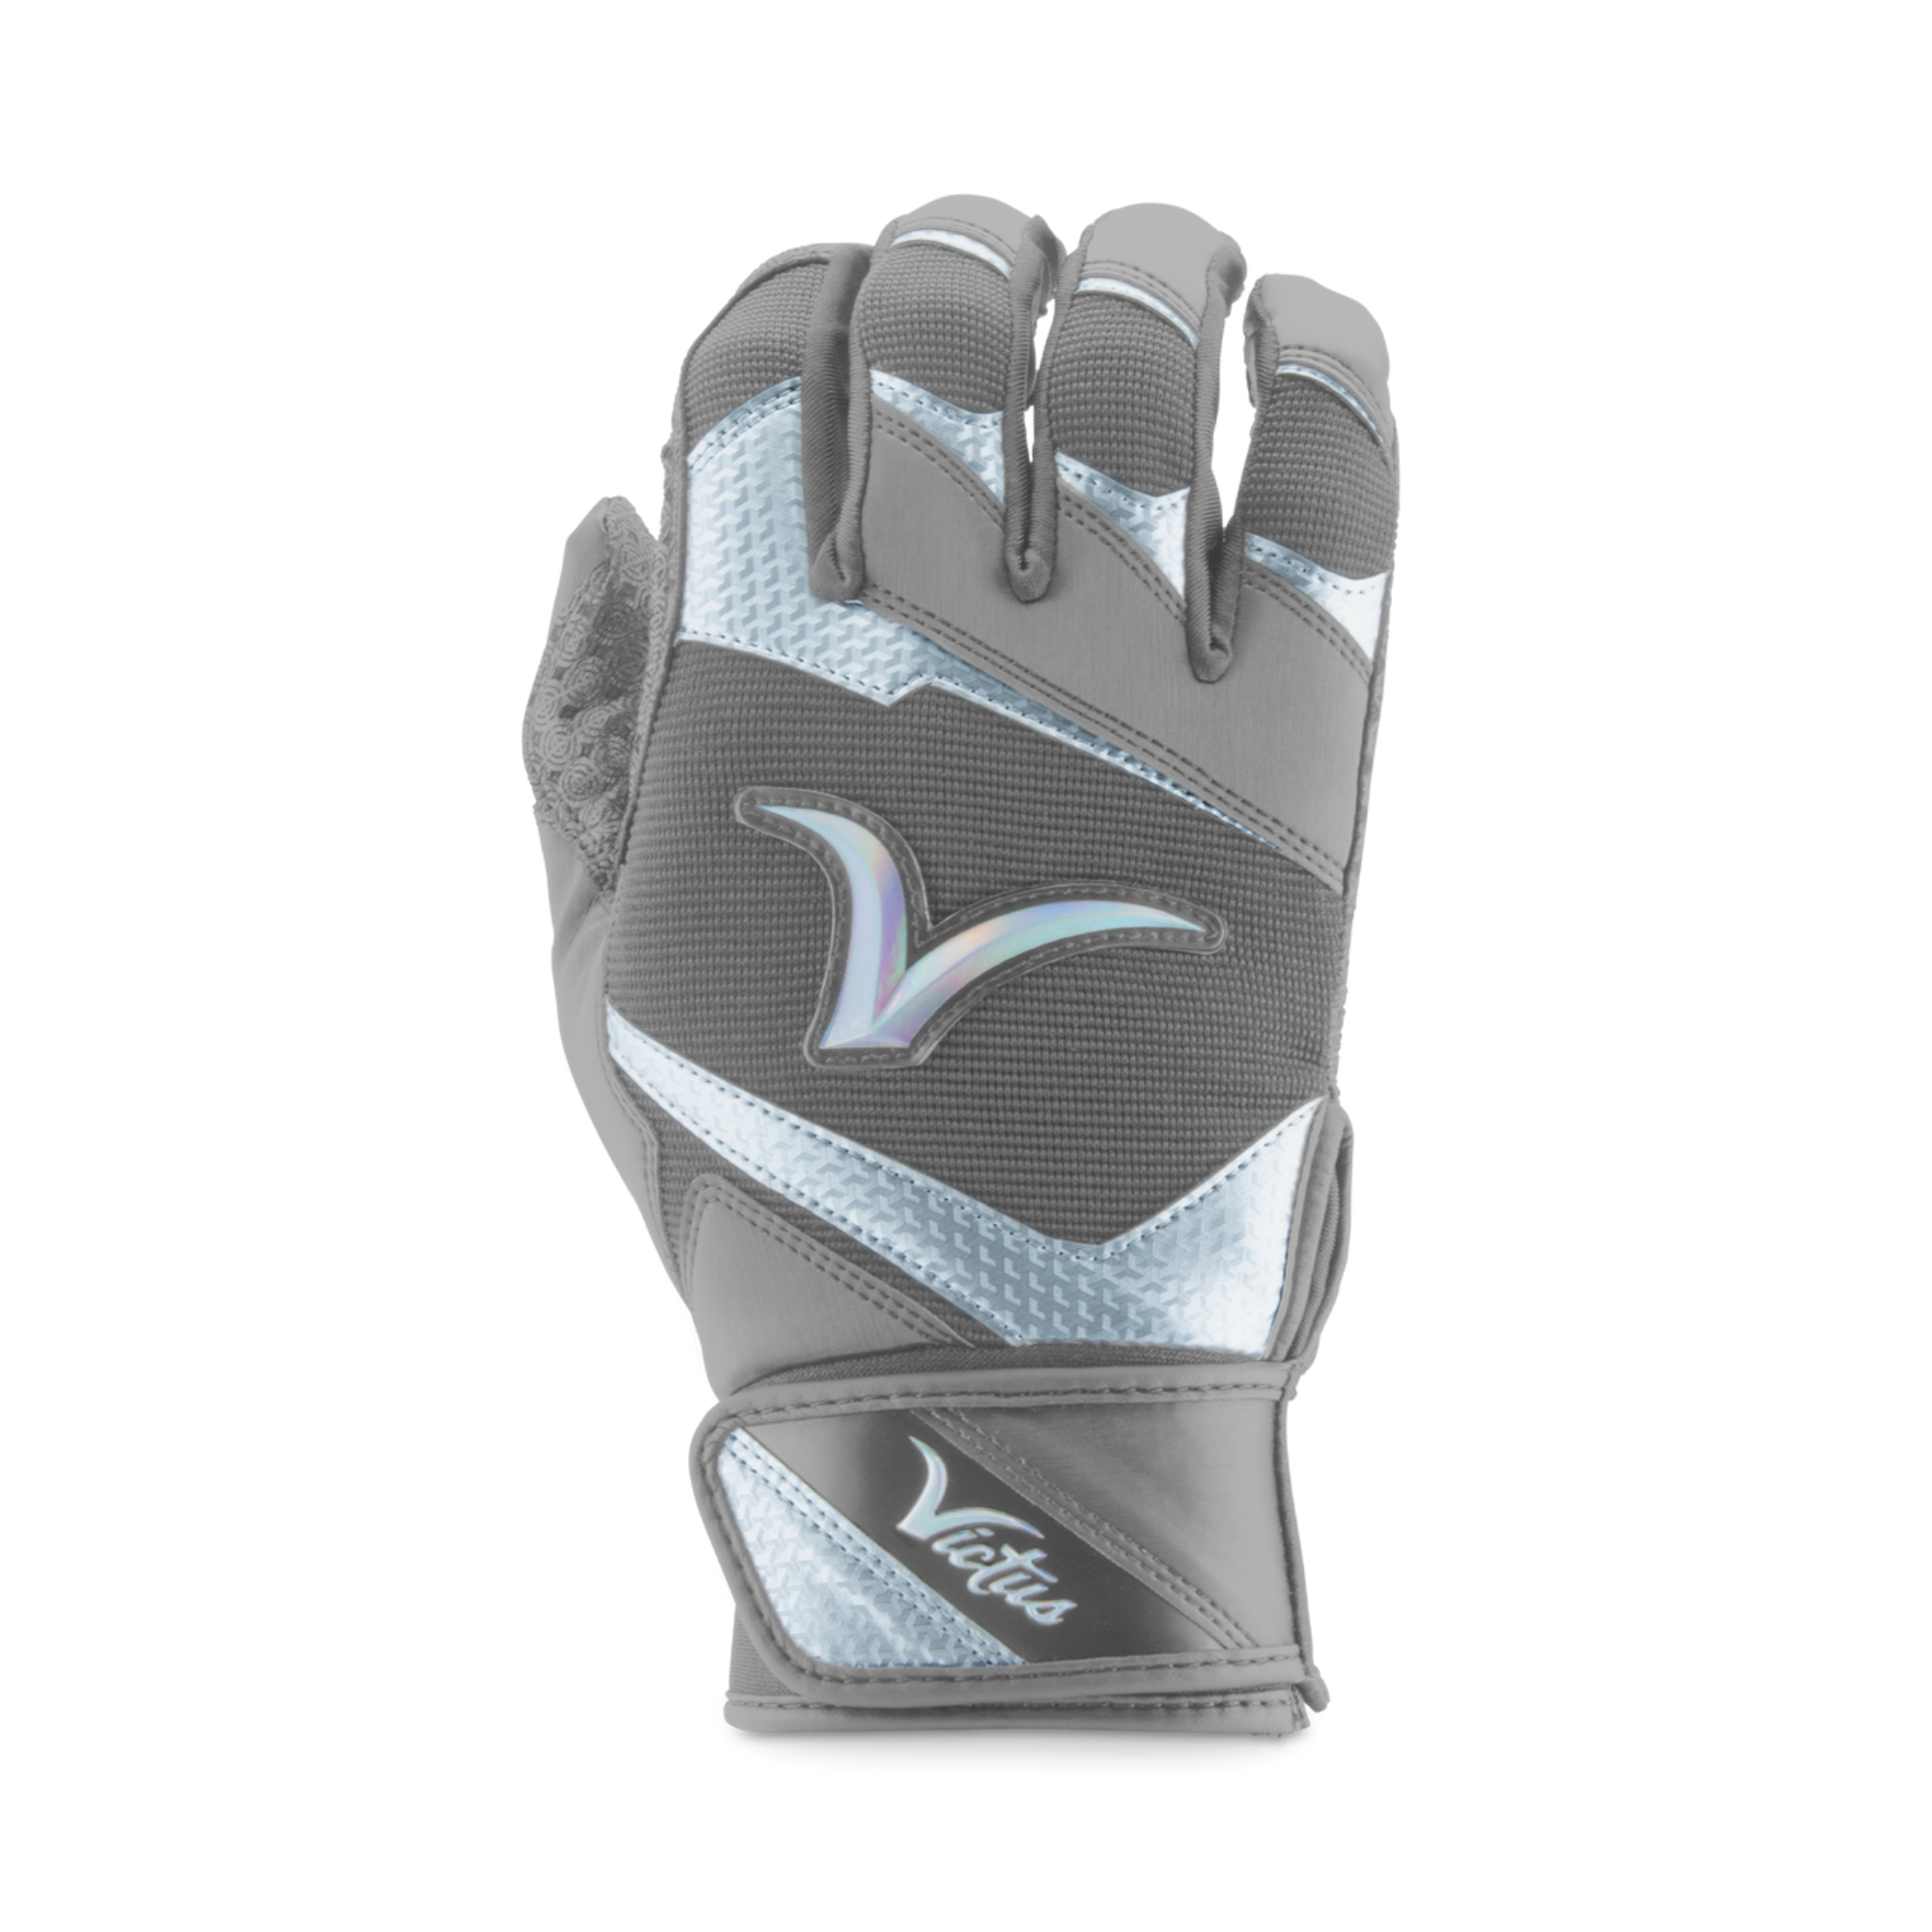 Victus Showtime Glove Adult Gray